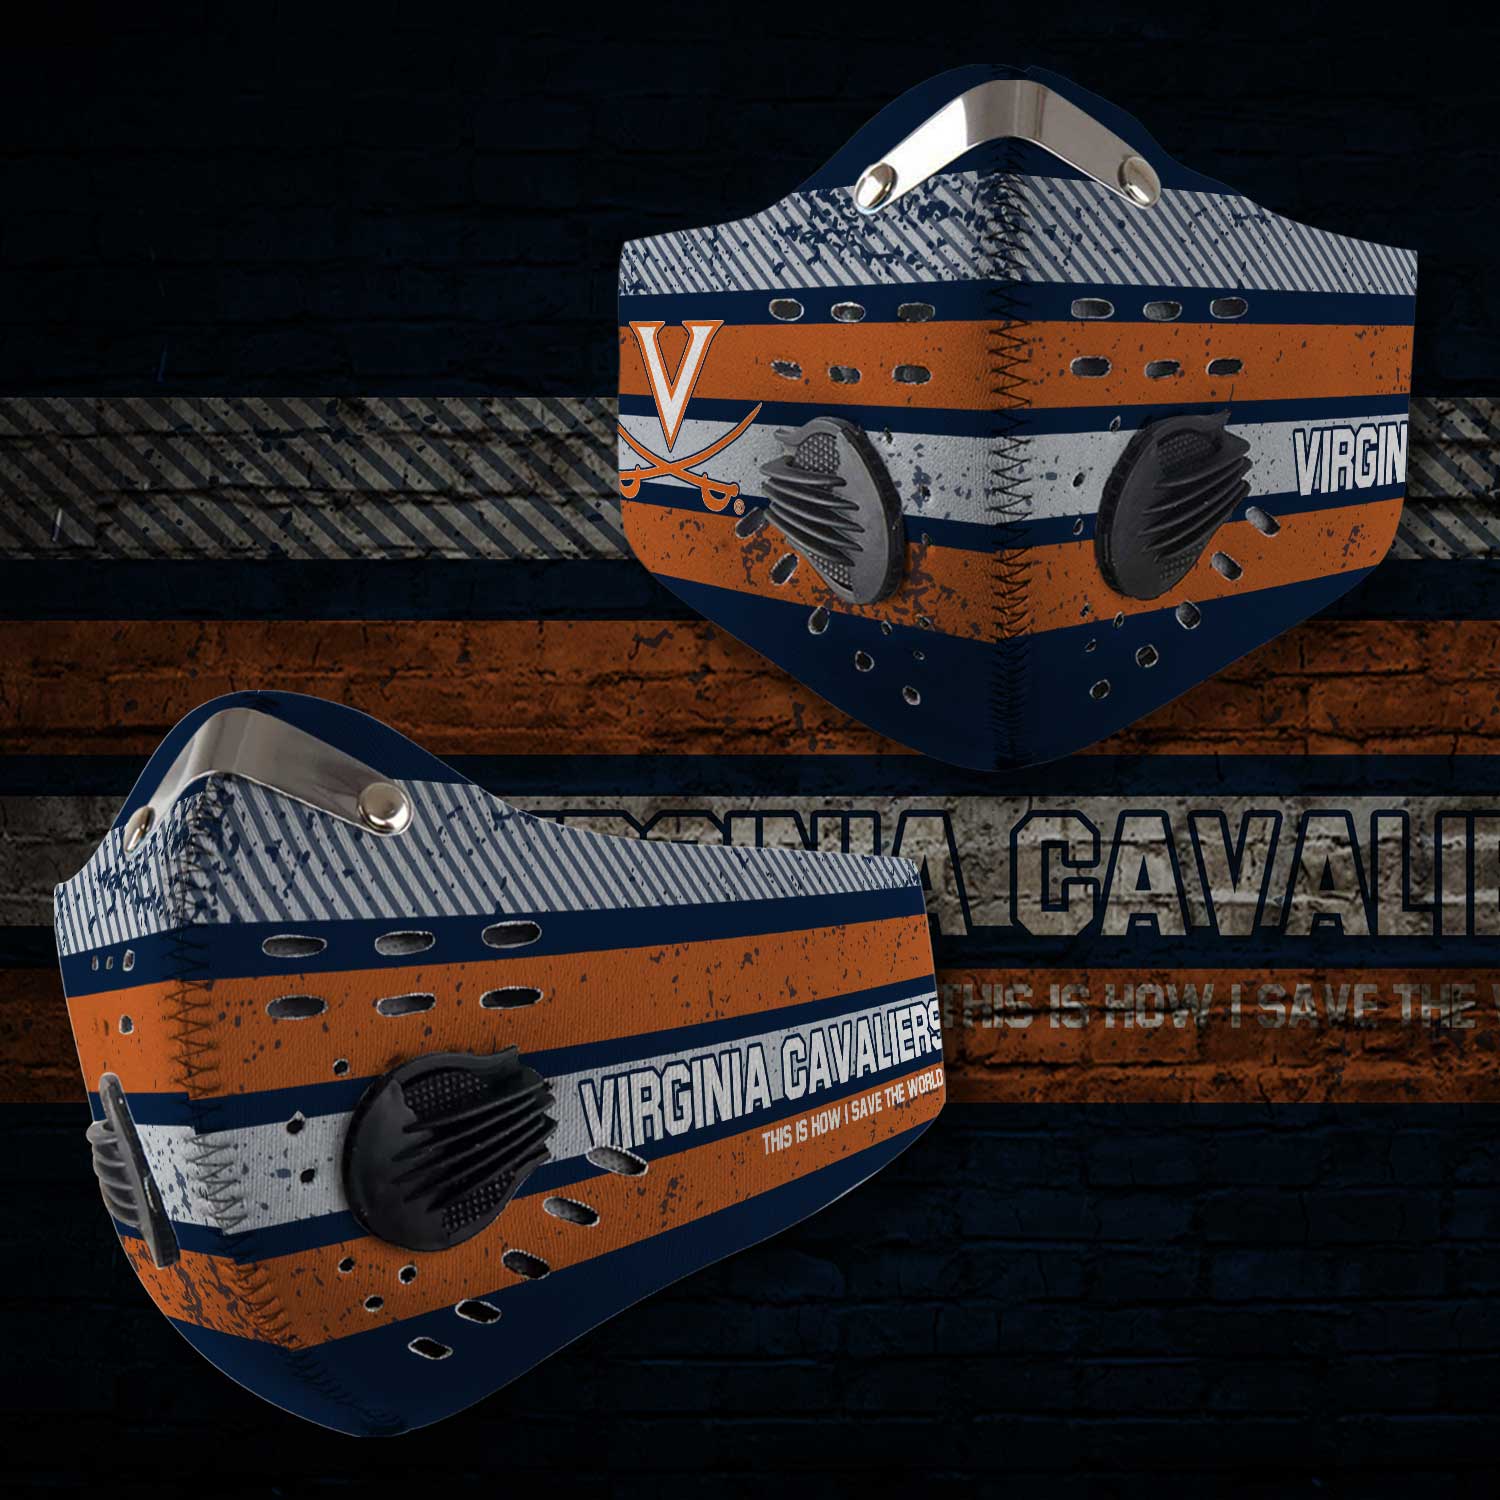 Virginia cavaliers this is how i save the world carbon filter face mask